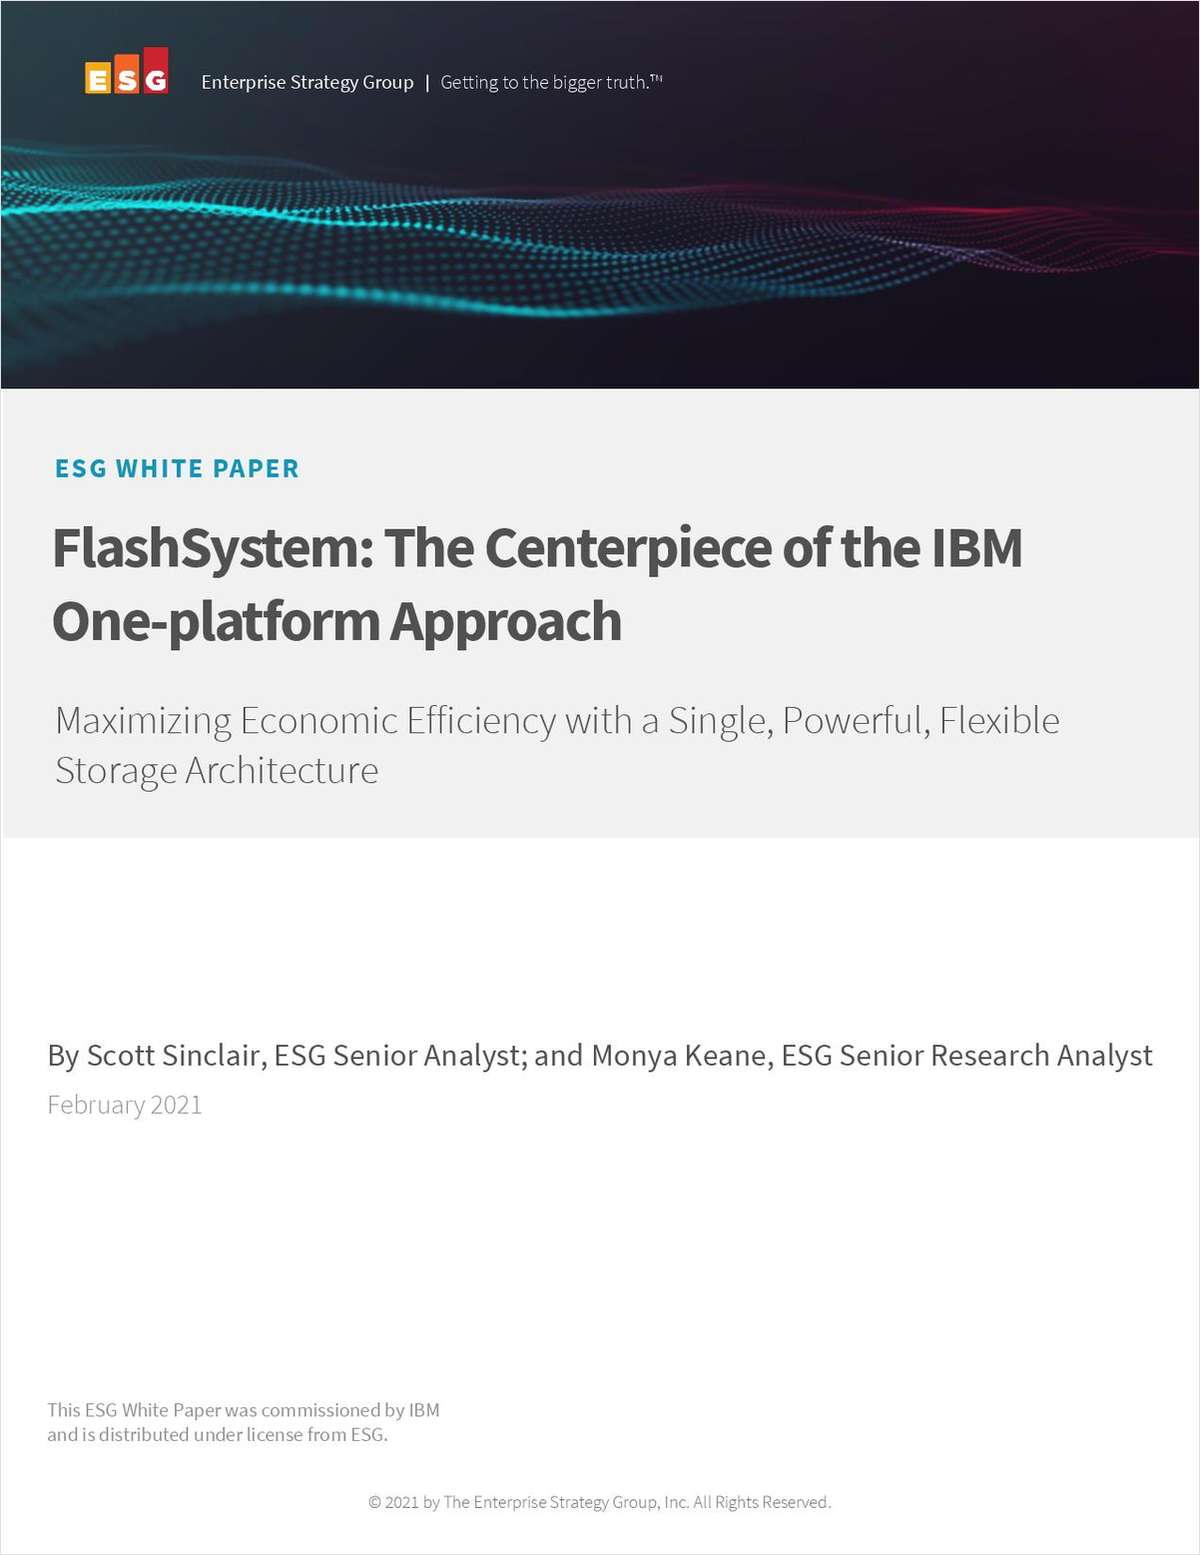 FlashSystem: The Centrepiece of the IBM One-platform Approach